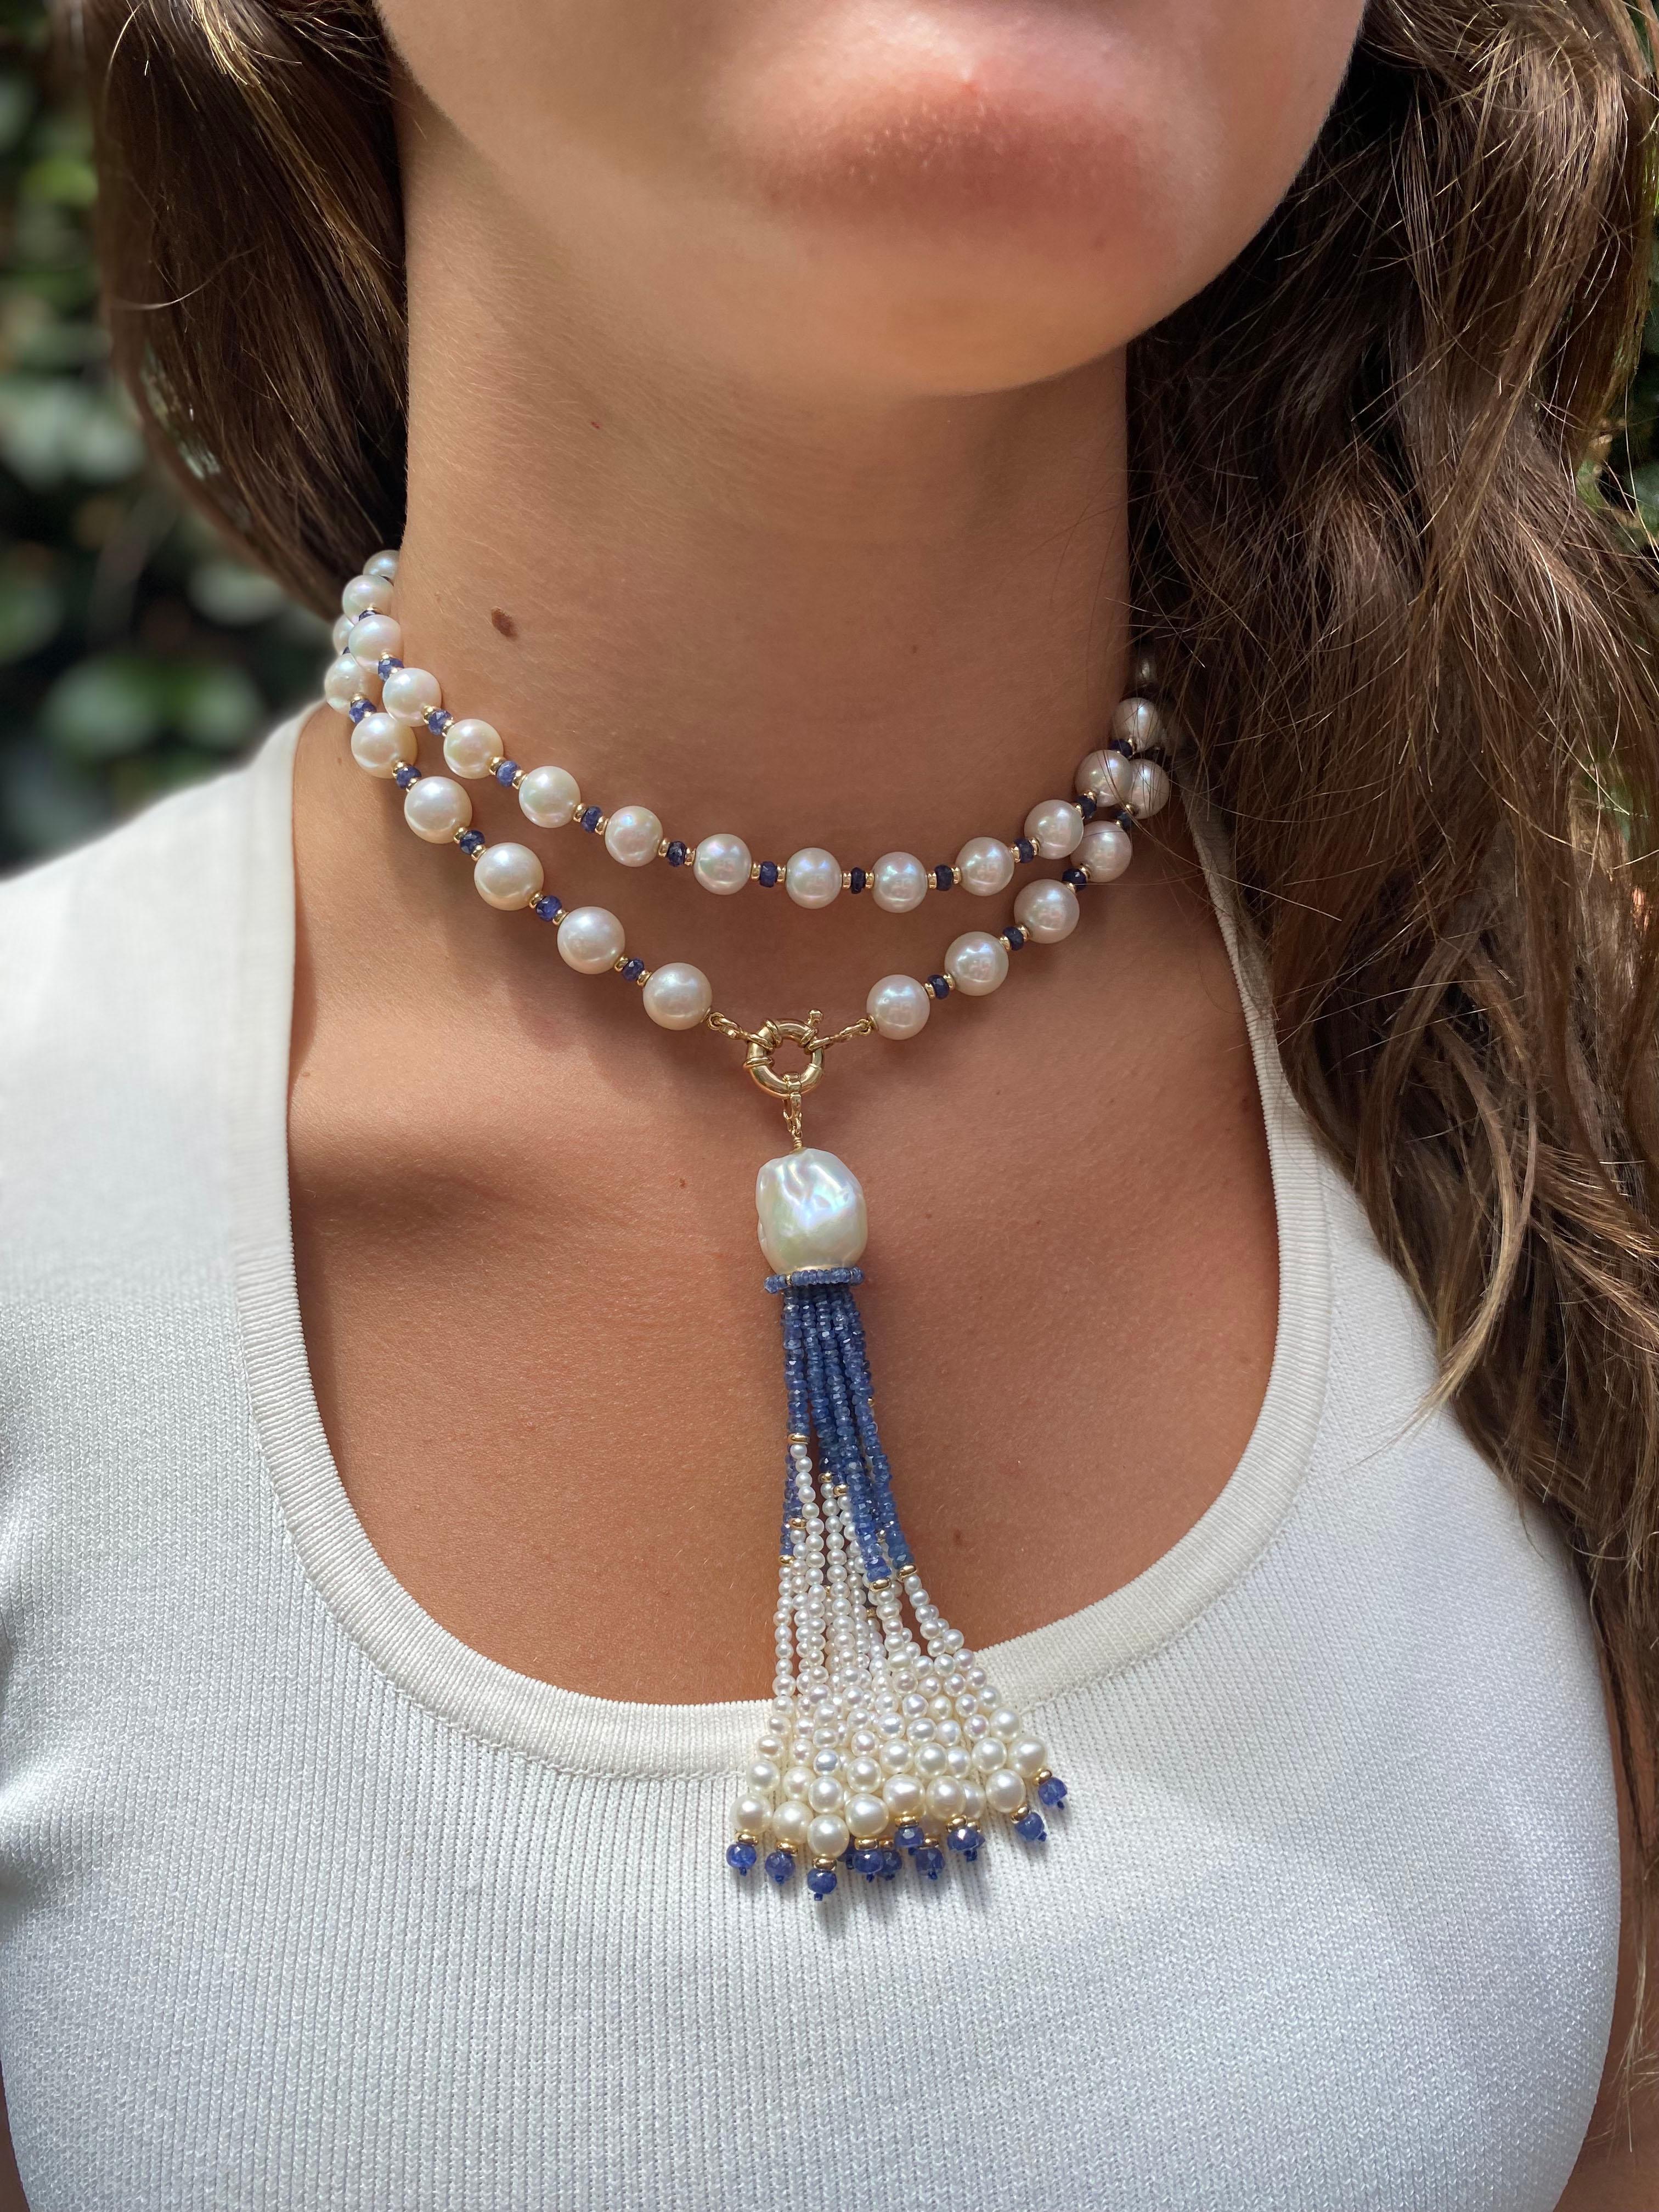 Gorgeous Sautoir by Marina J. This piece is made using all cultured Pearls which display a beautiful iridescent sheen, Faceted Blue Sapphires and 14k Yellow Gold findings. Due to their semi translucent nature, all the Sapphire used in this Sautoir